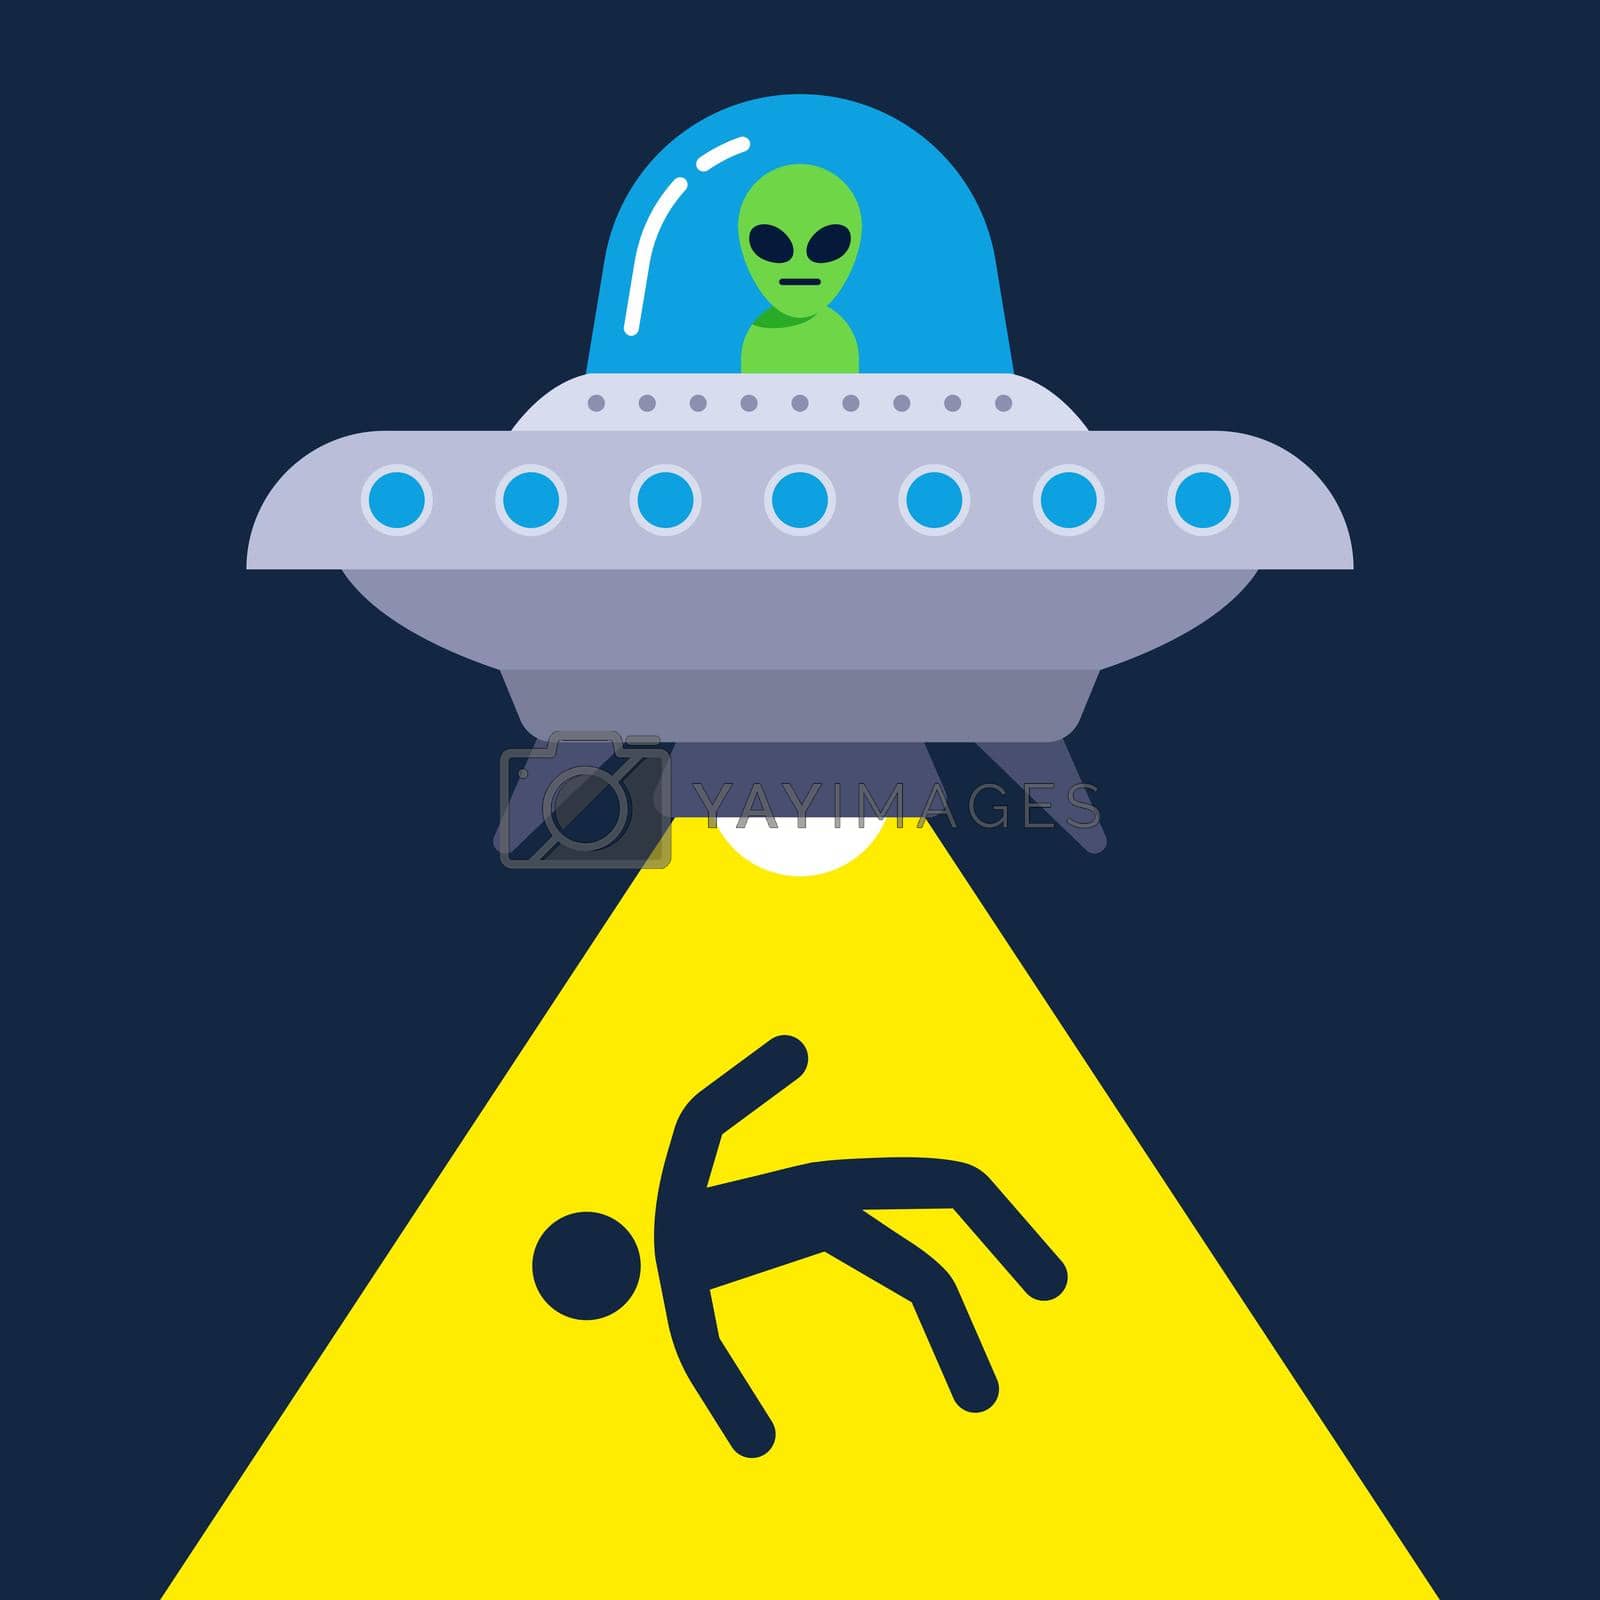 Royalty free image of illustration of human abduction by aliens. by PlutusART